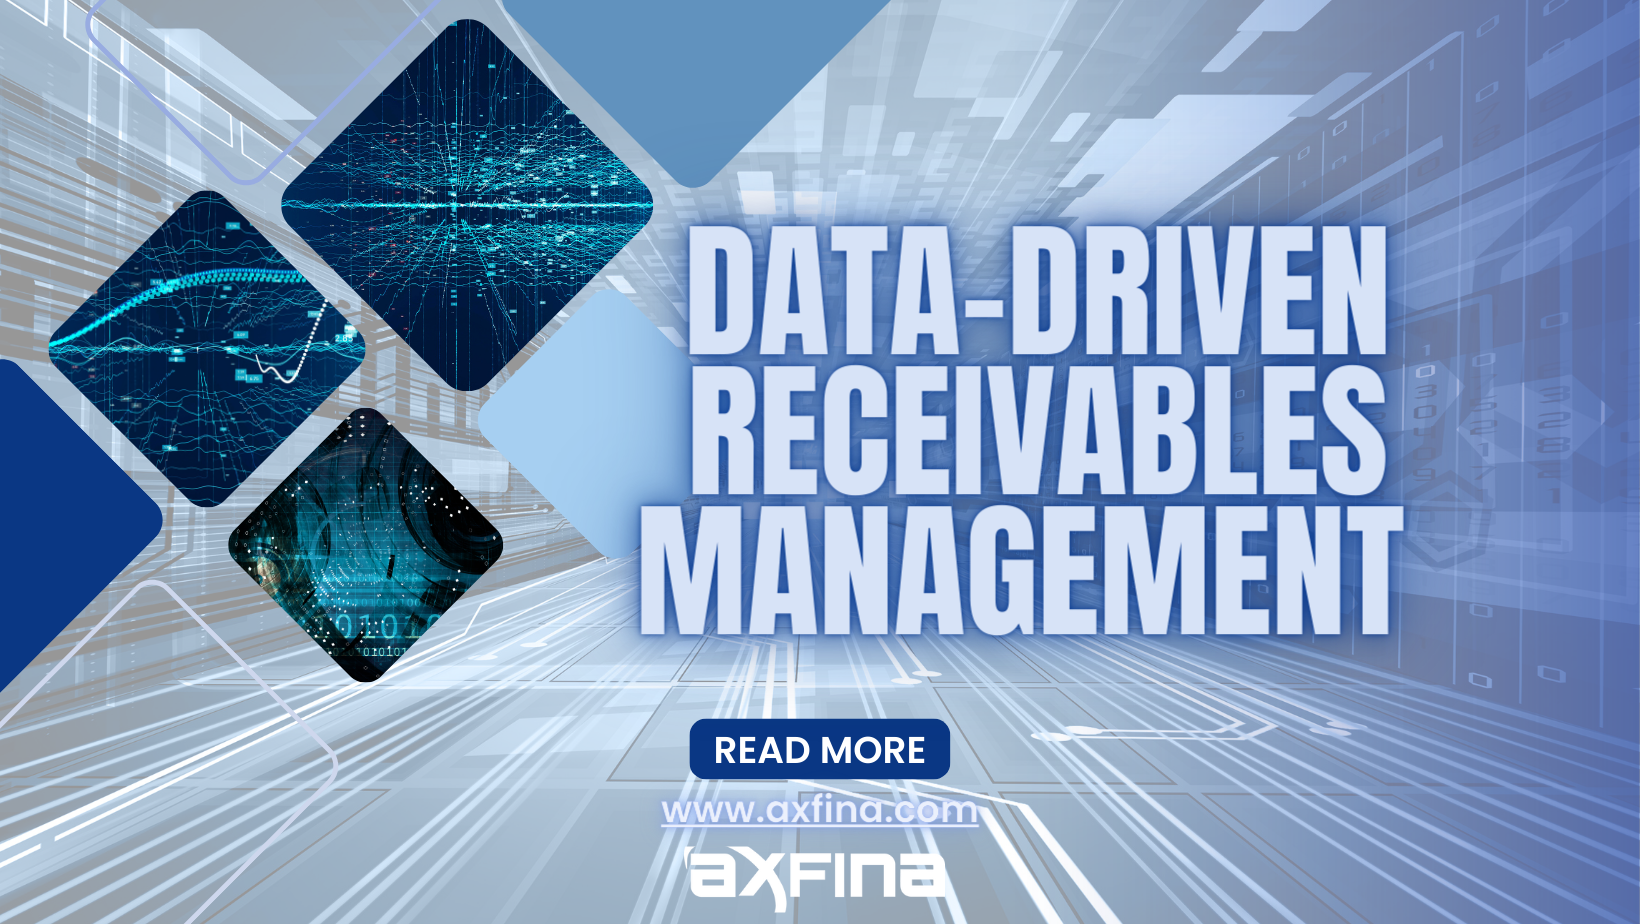 How to benefit from data-driven receivables management strategy